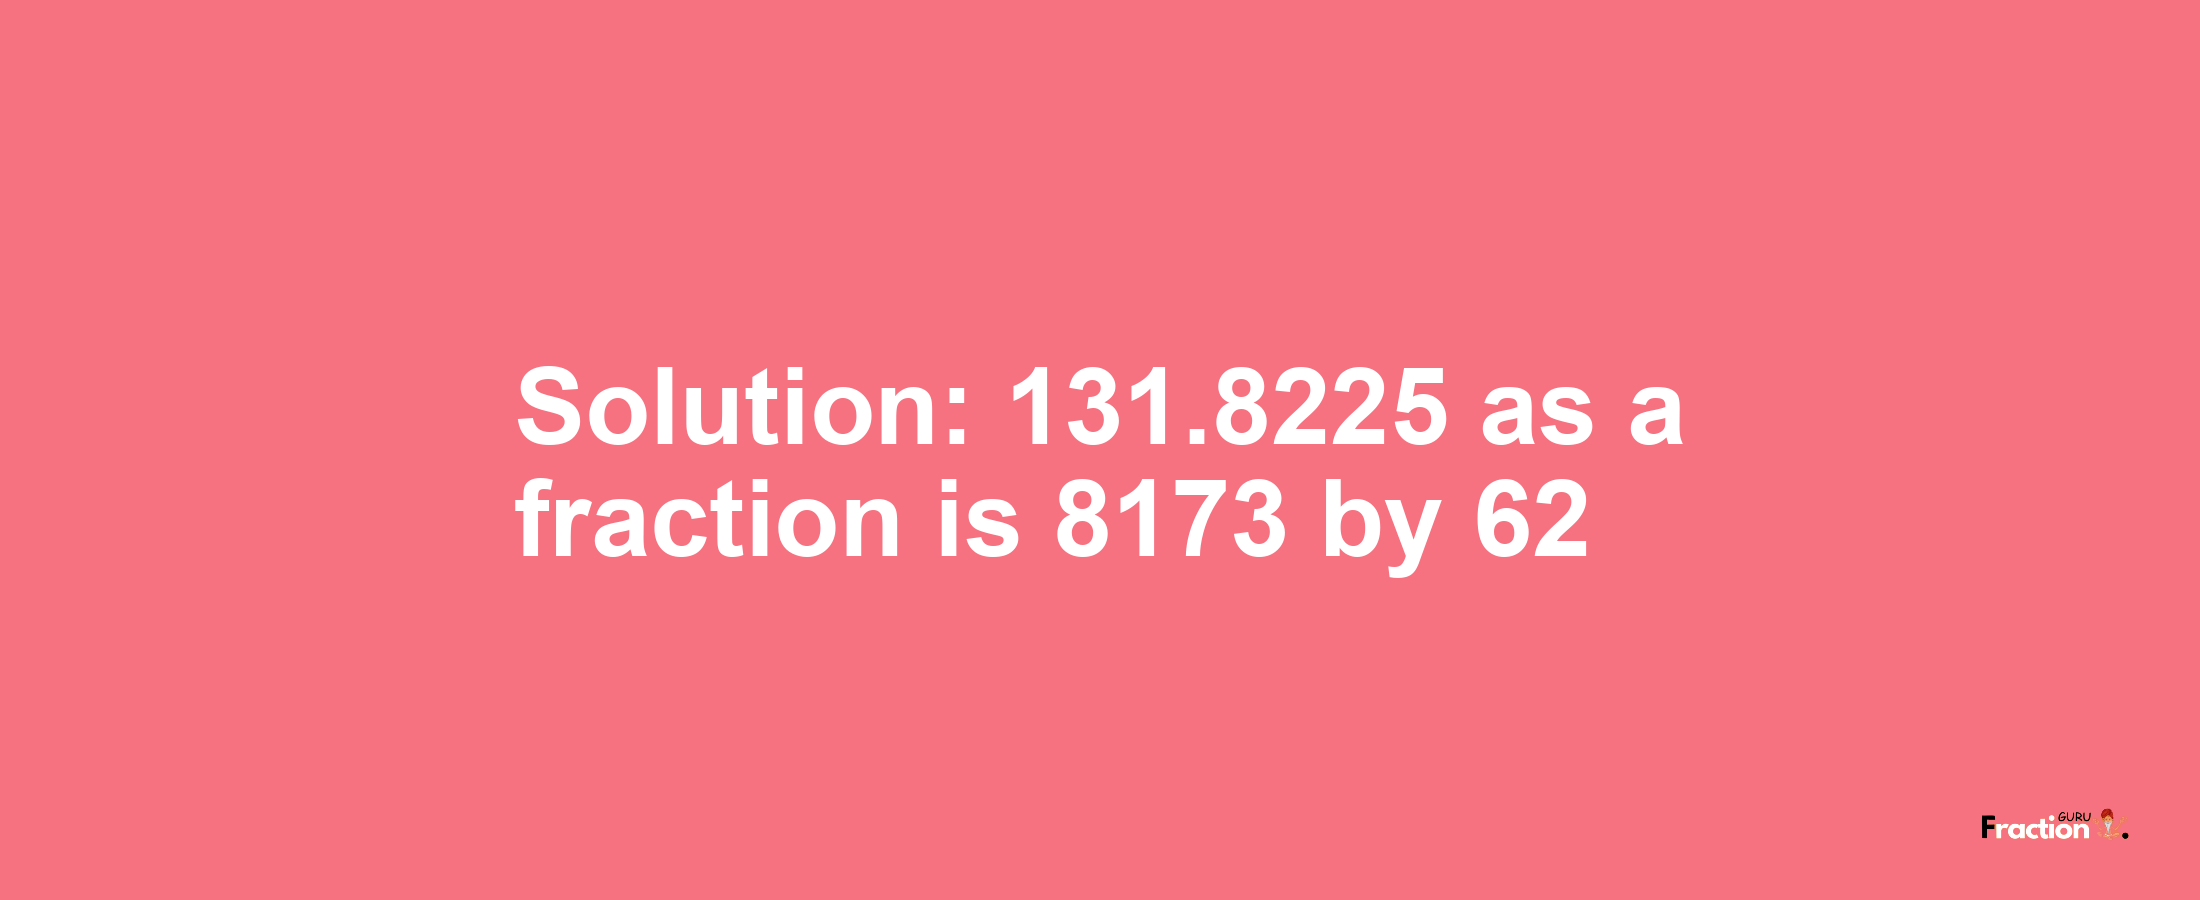 Solution:131.8225 as a fraction is 8173/62